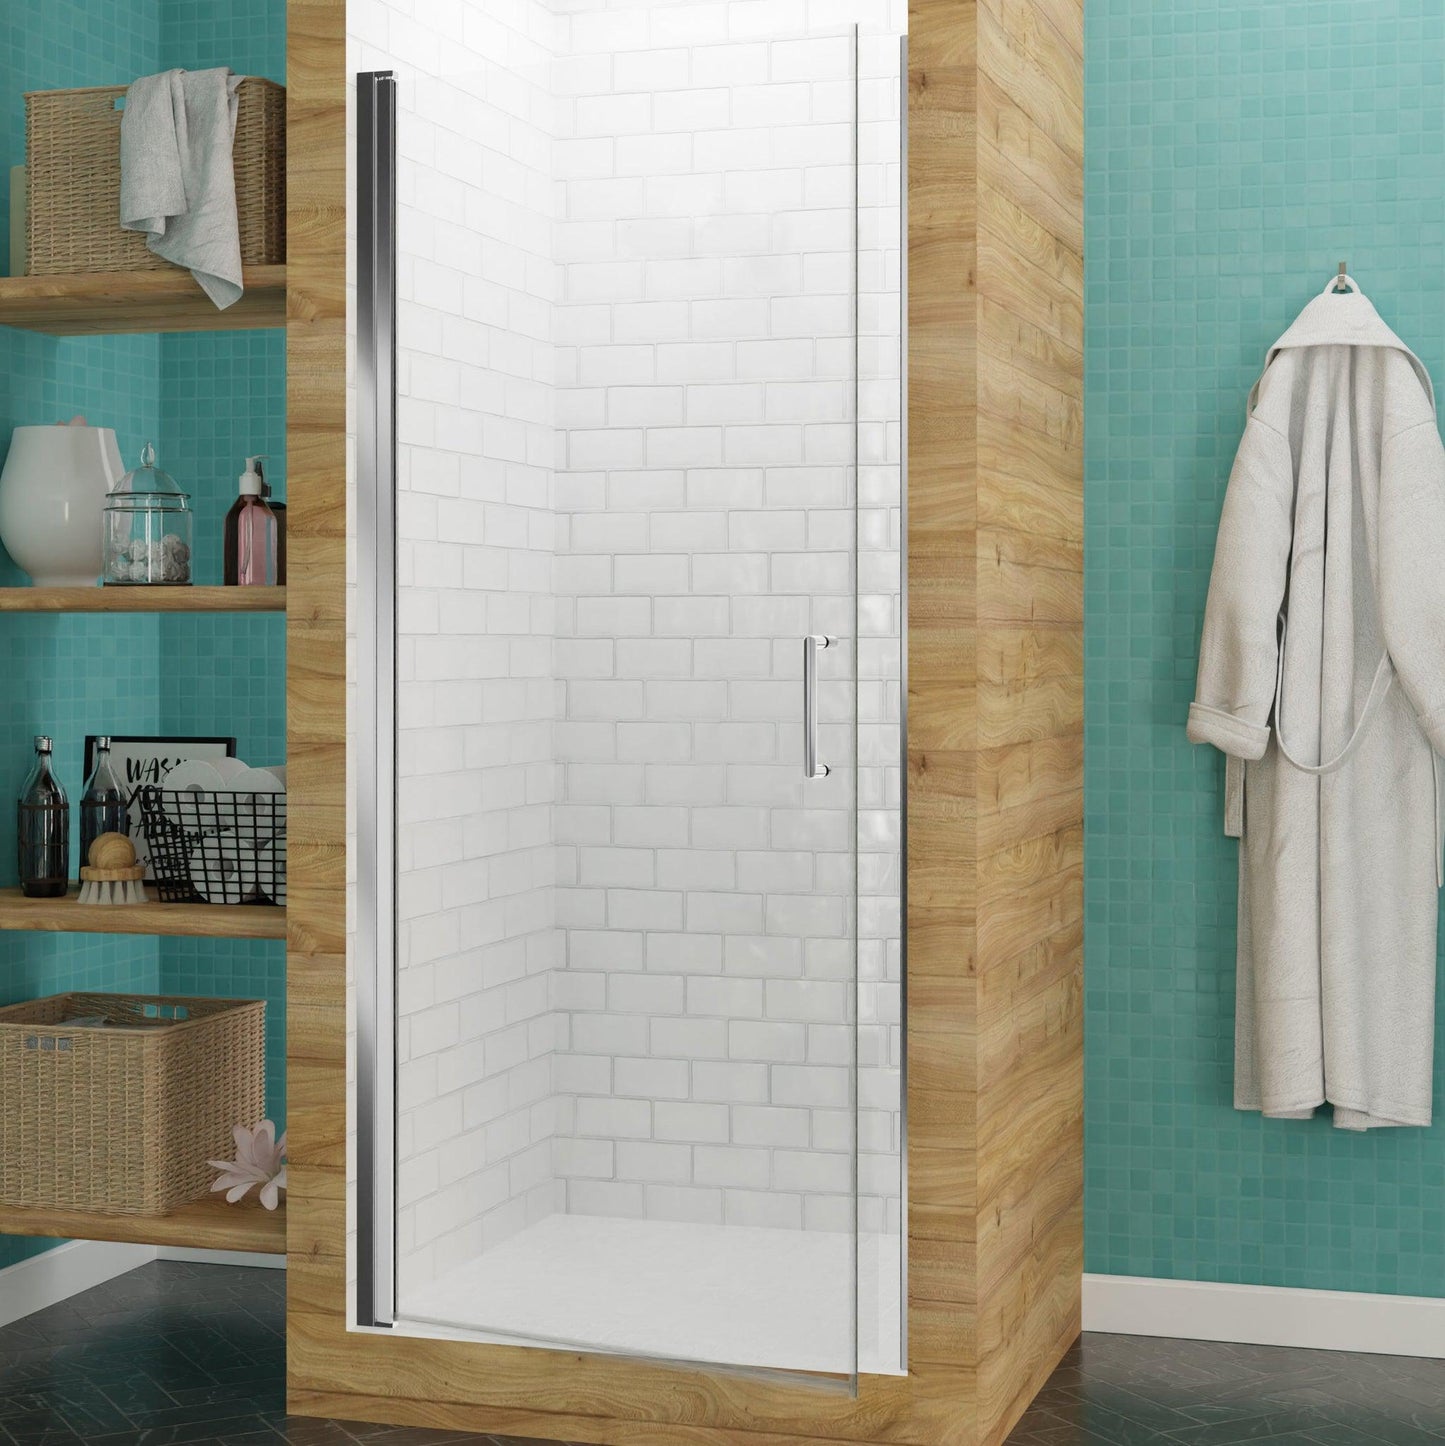 ANZZI Lancer Series 29" x 72" Semi-Frameless Rectangular Polished Chrome Hinged Shower Door With Handle and Tsunami Guard